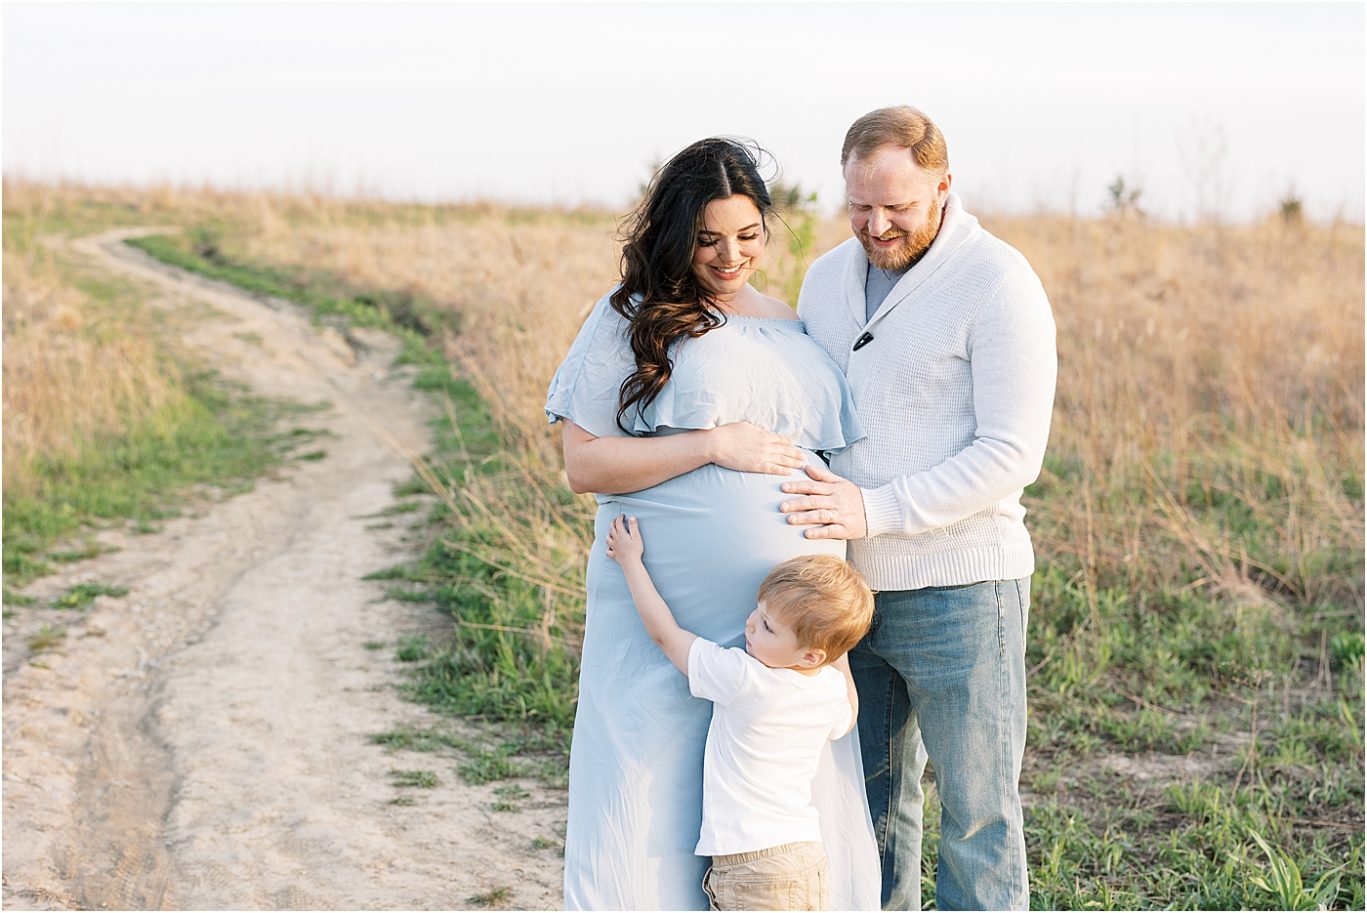 Mom and Dad looking at their oldest son as he hugs Mom's pregnant belly. Photo by Lindsay Konopa Photography.